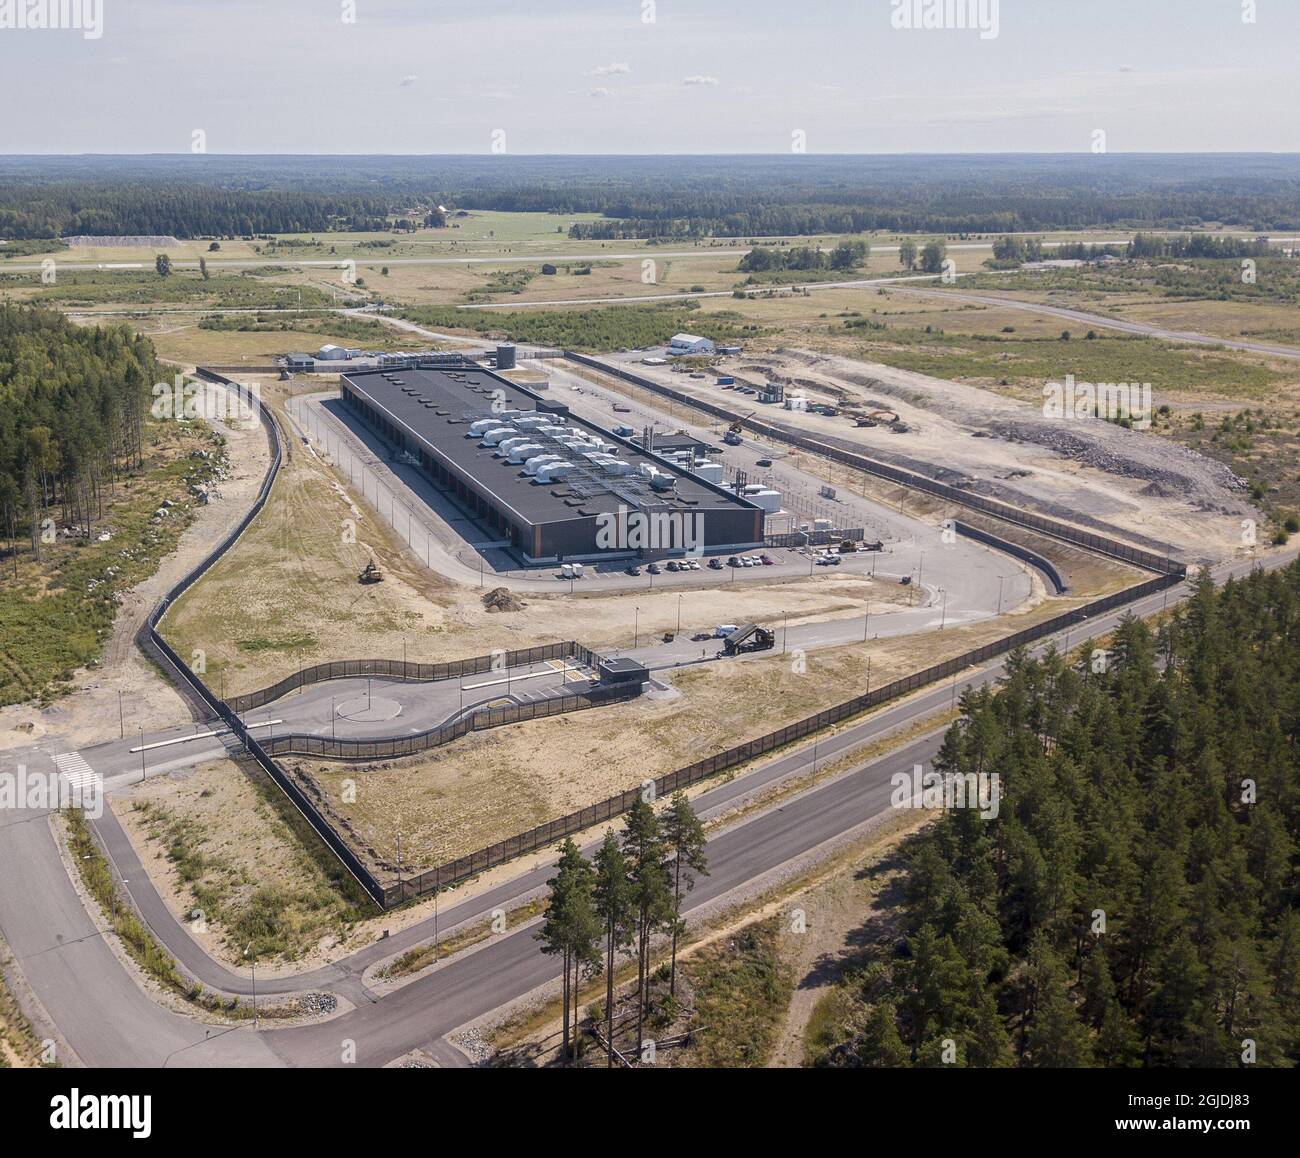 Amazon web services server hall in Kjula outside Eskilstuna, Sweden on  August 12, 2020. Amazon are planning to build three server halls in  Eskilstuna. Sp far only "stage 1" has been completed.